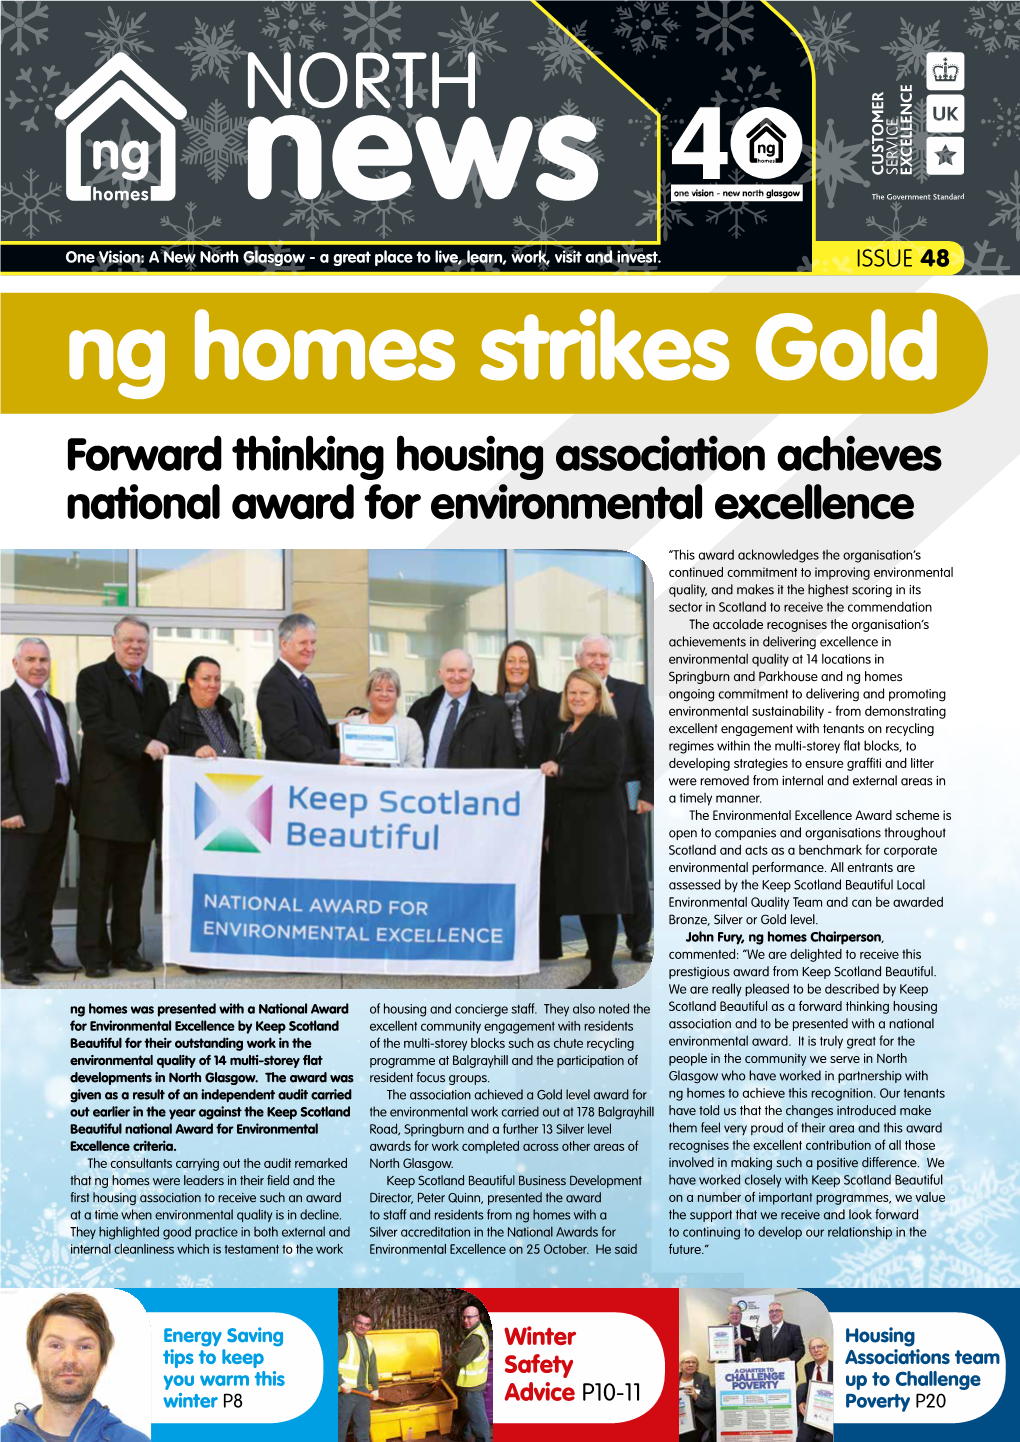 Forward Thinking Housing Association Achieves National Award for Environmental Excellence